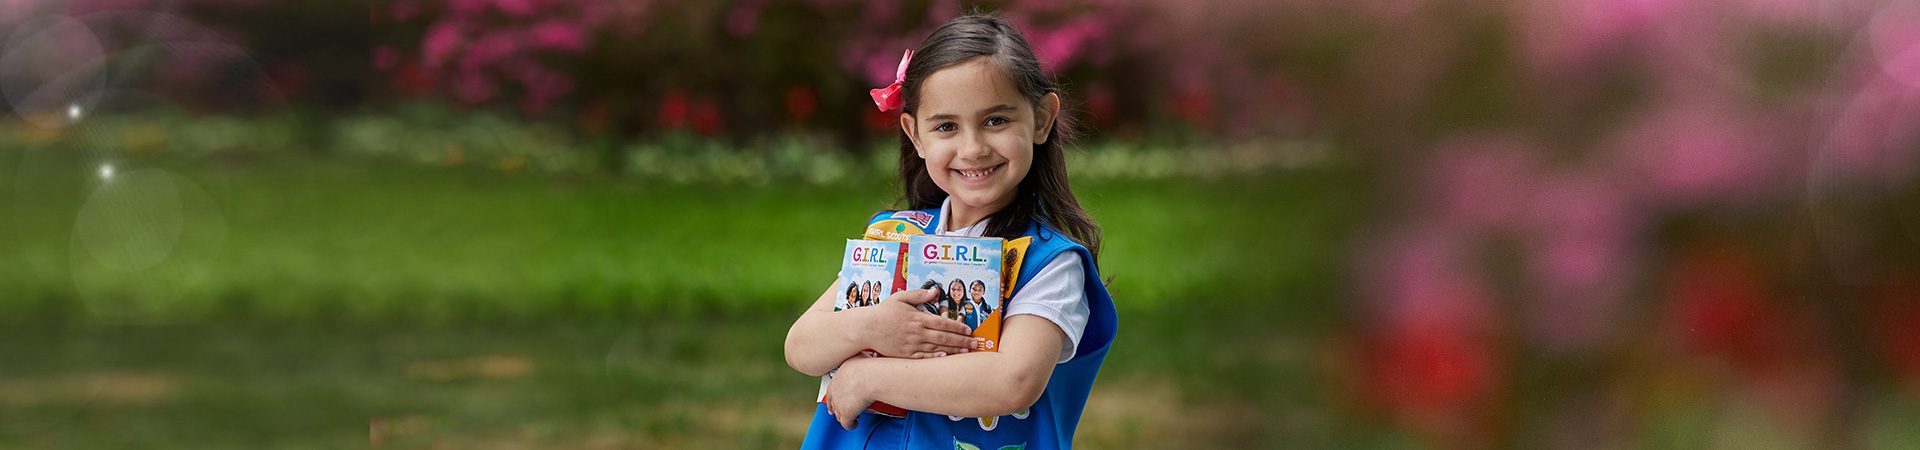  group of daisy girl scouts holding hands in uniform blue apron vest with patches and badges 